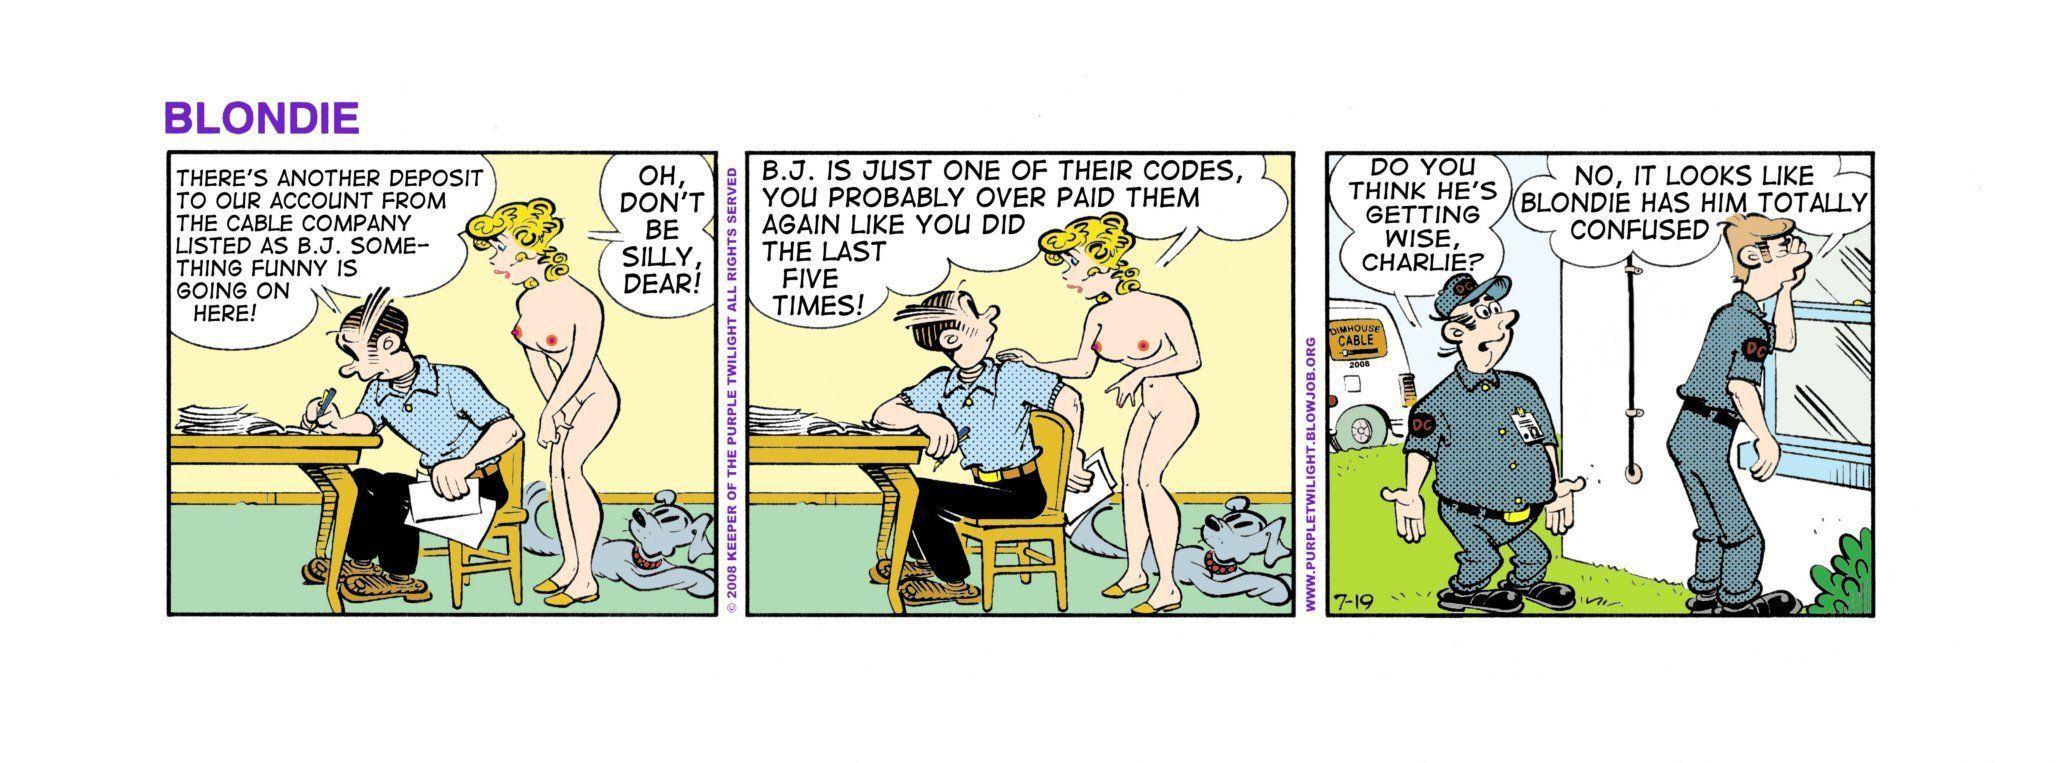 Blondie giving dagwood a blowjob image